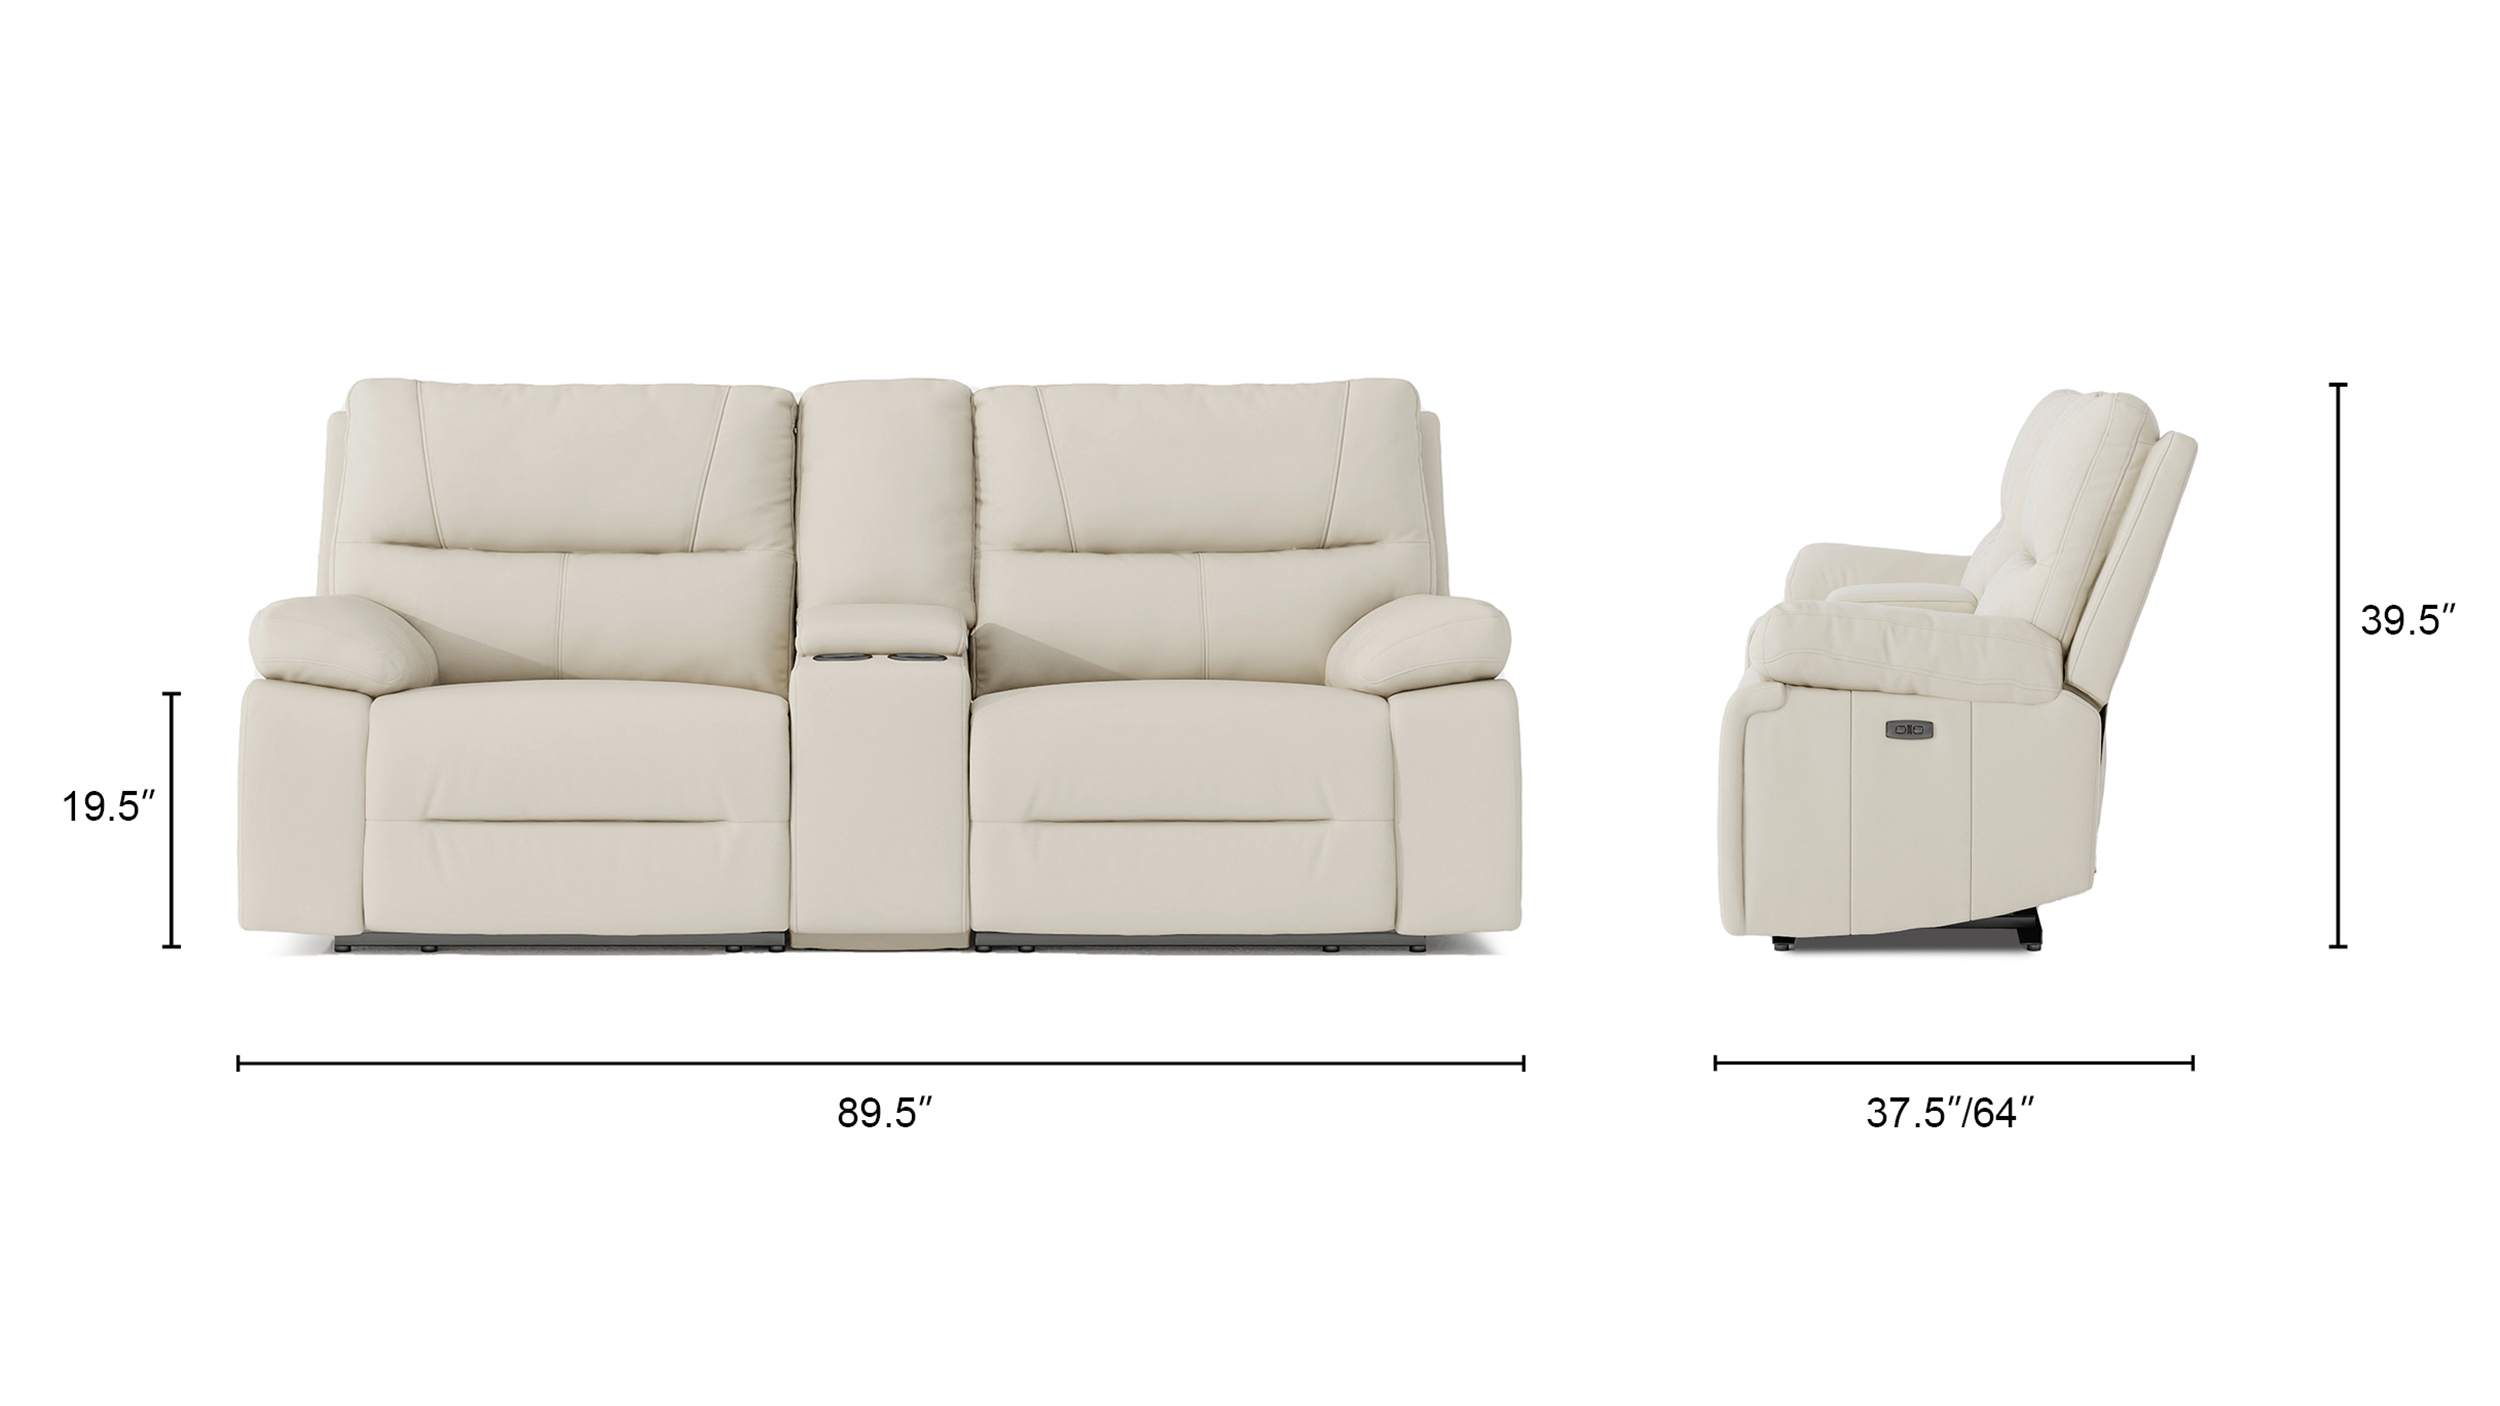 Malibu Modern Power Motion 3-Piece Reclining Loveseat Sofa with Cup Holders, Cream Taupe Beige